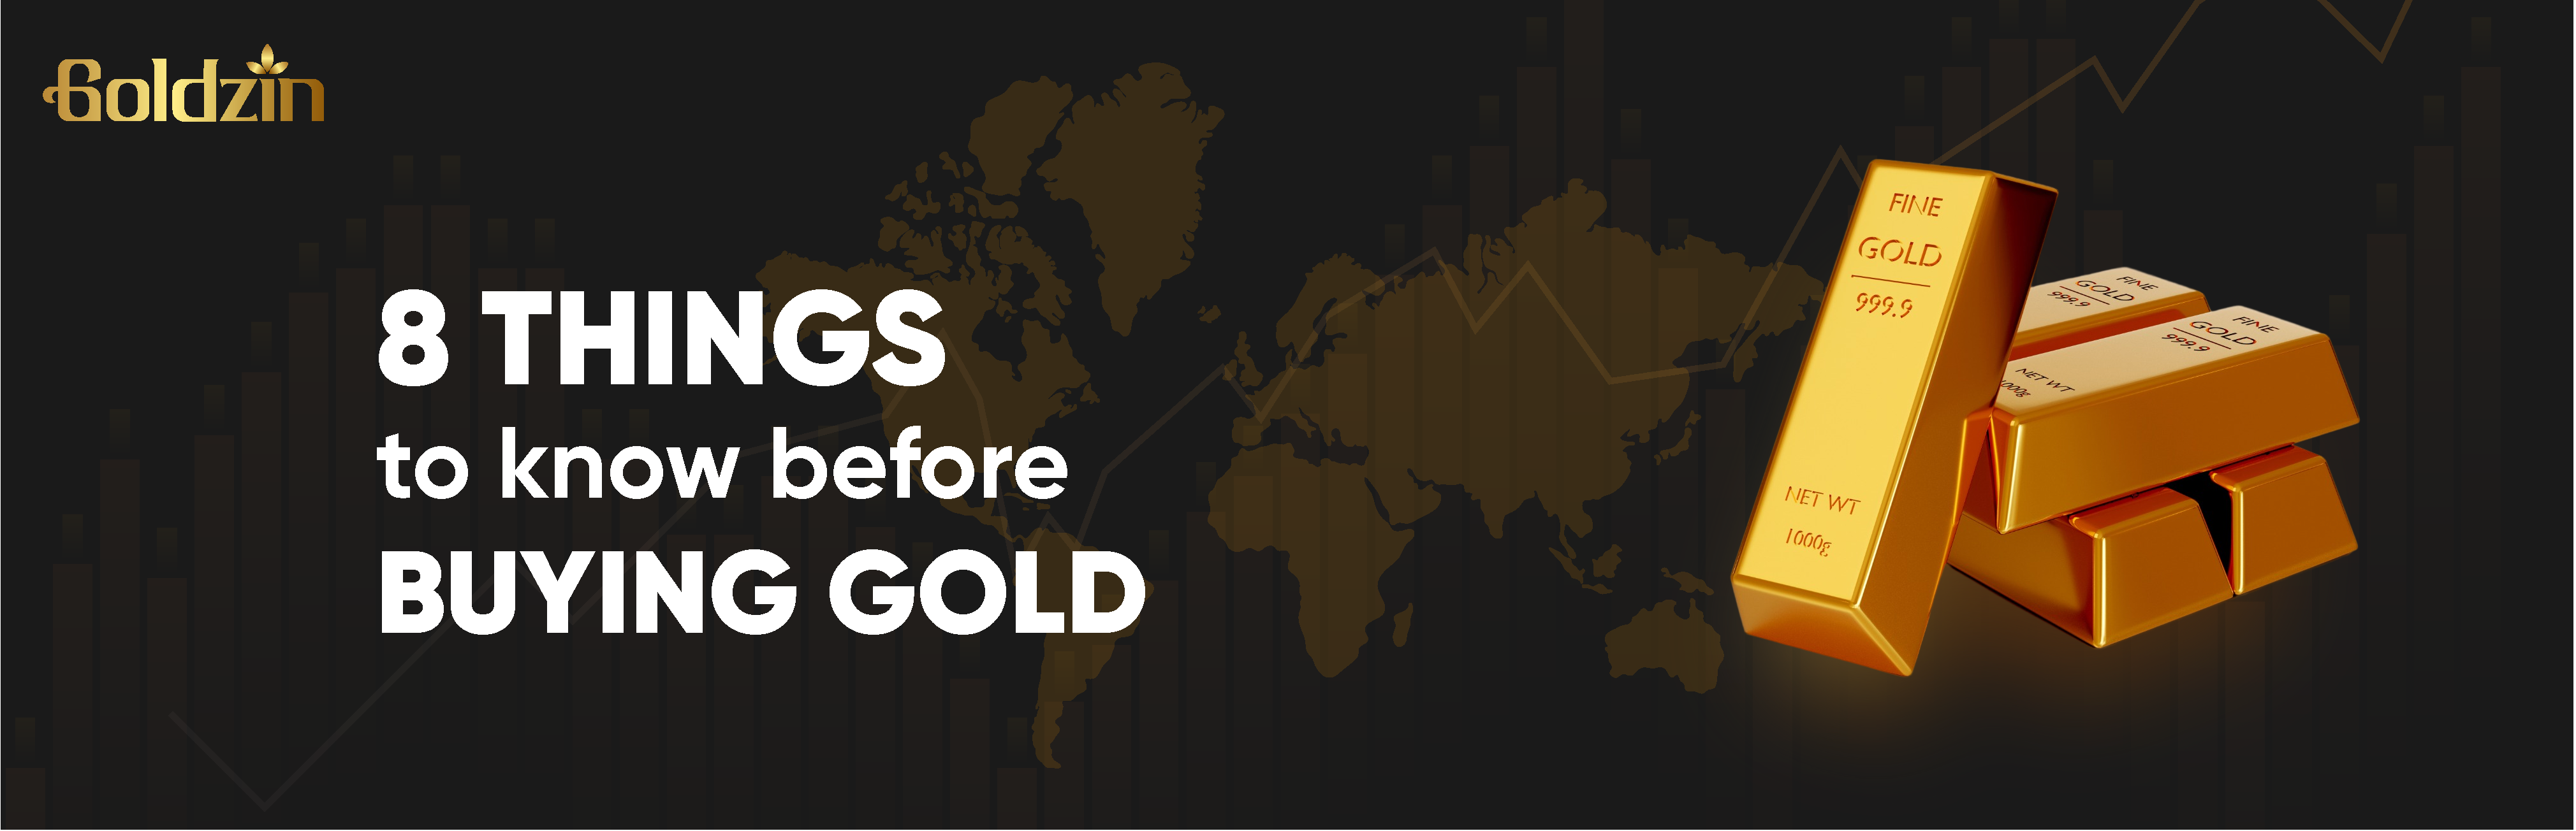 8-things-to-know-before-buying-gold